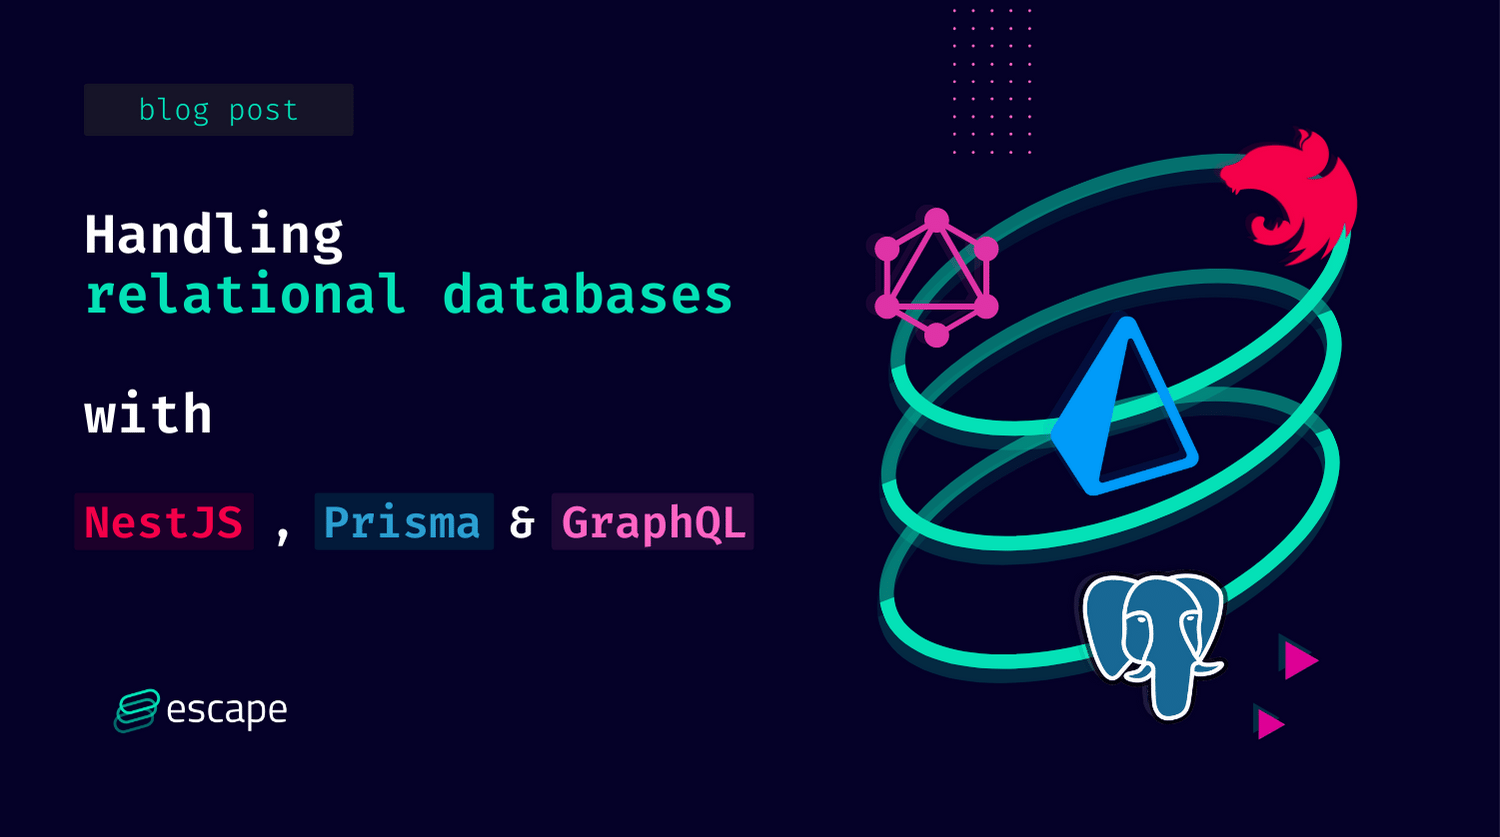 Guide to handling relational databases with Prisma, NestJS and GraphQL